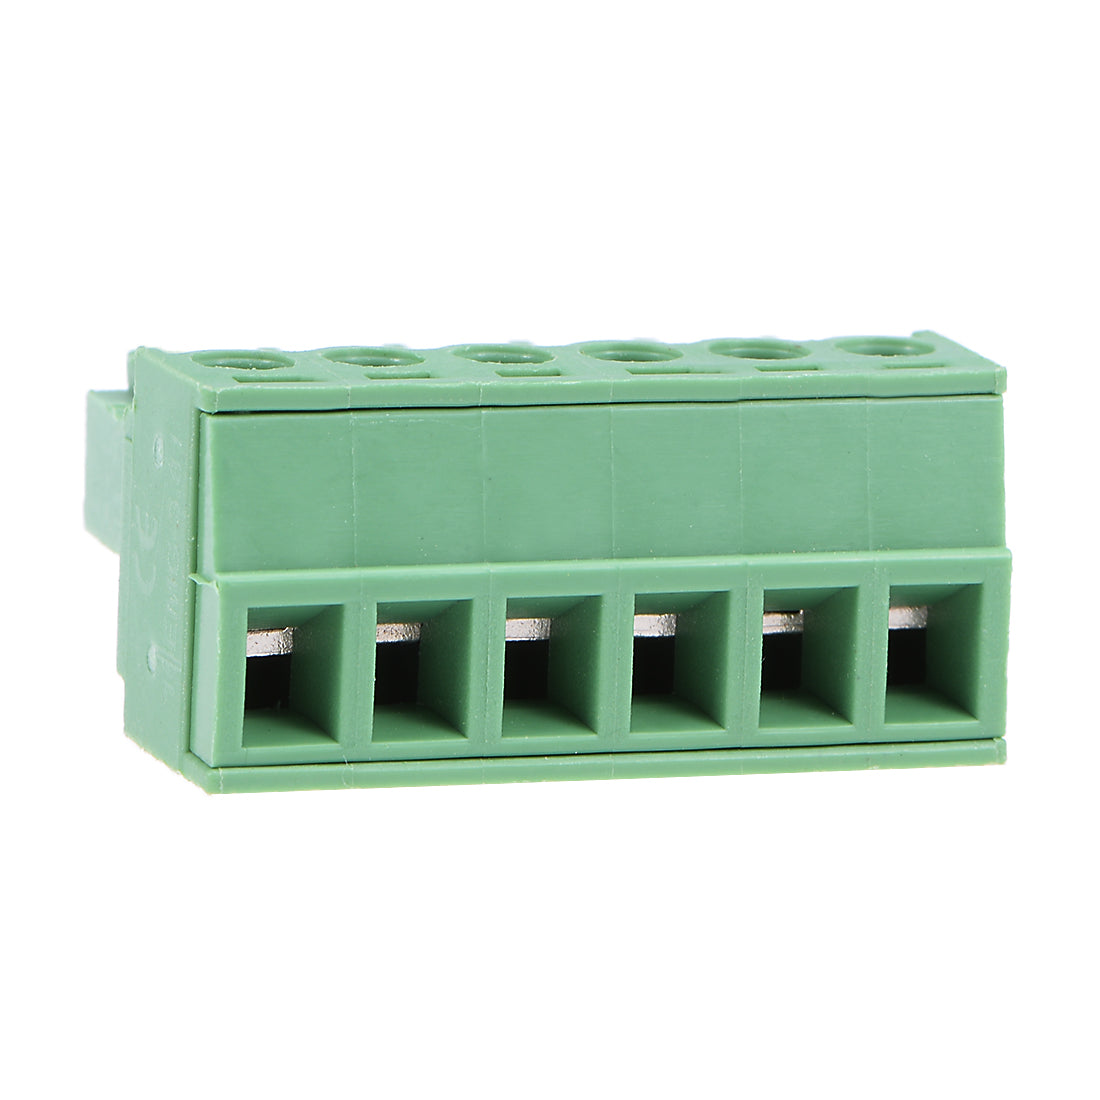 uxcell Uxcell 5Pcs AC300V 10A 3.81mm Pitch 6P Flat Angle Needle Seat Insert-In PCB Terminal Block Connector green